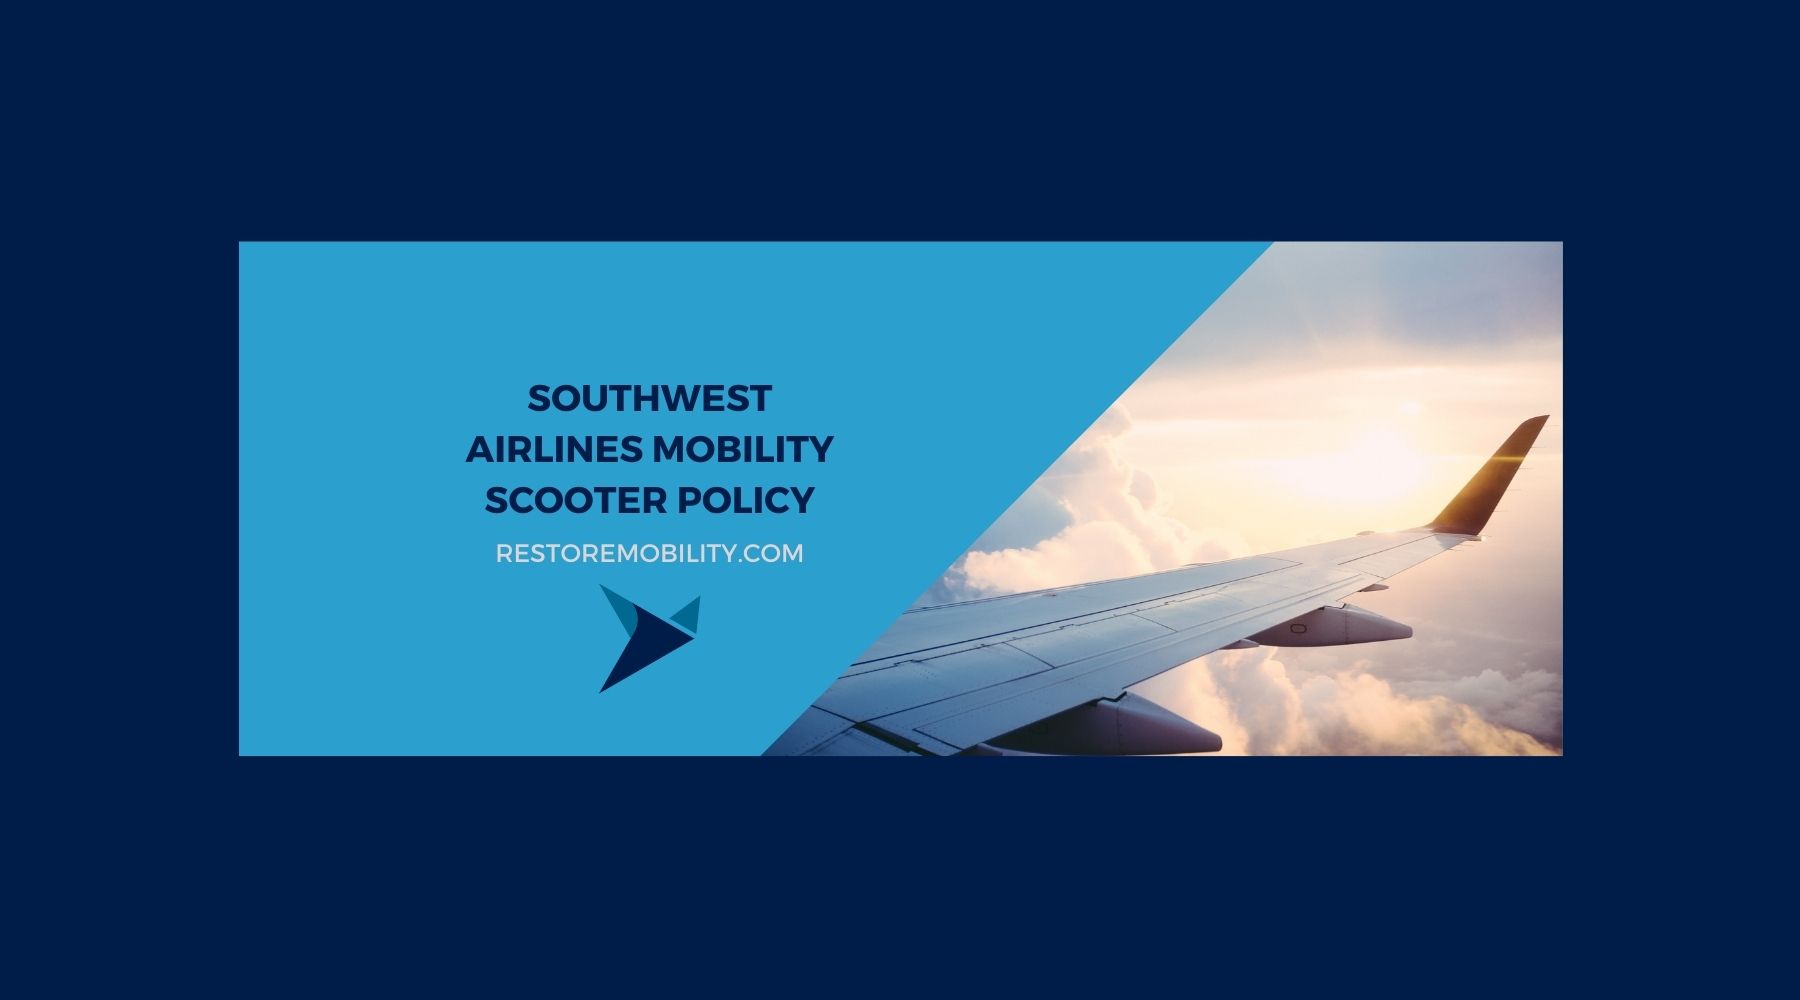 Southwest Airlines Mobility Scooter Policy